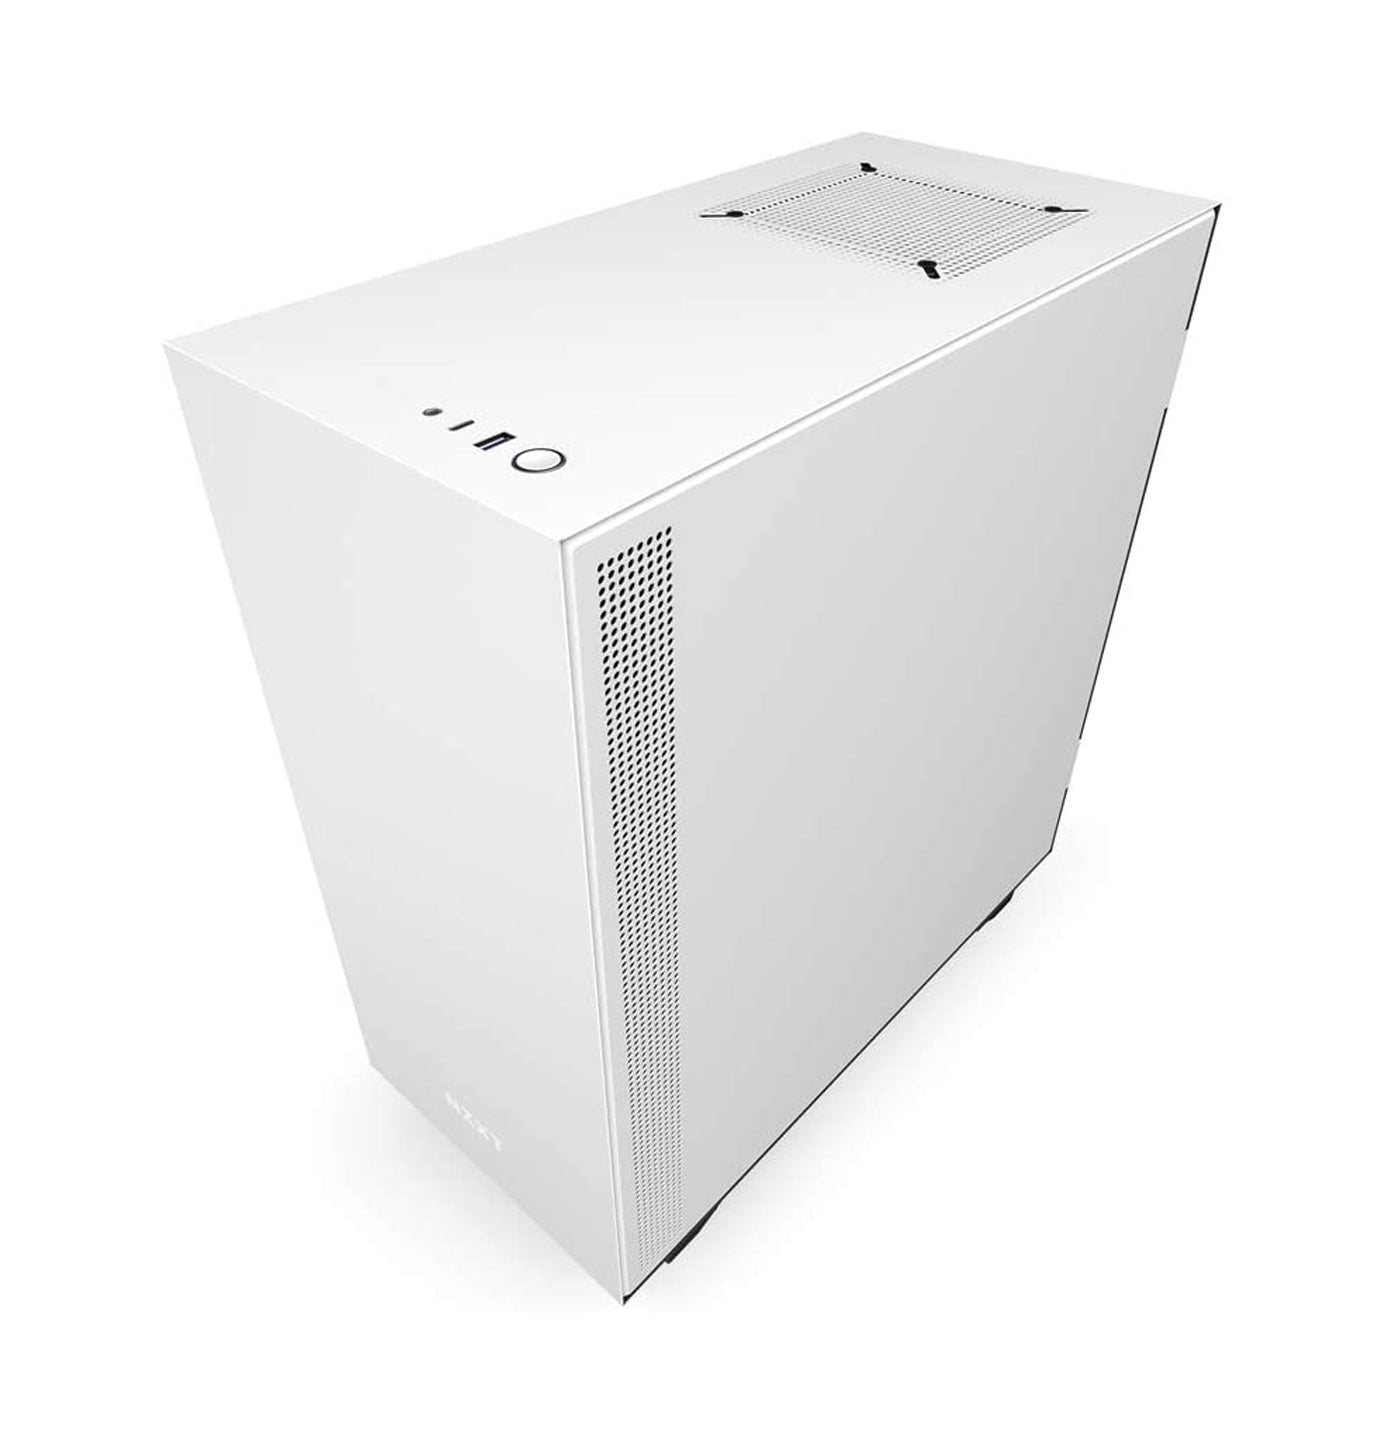 NZXT H510 White Mid Tower Case